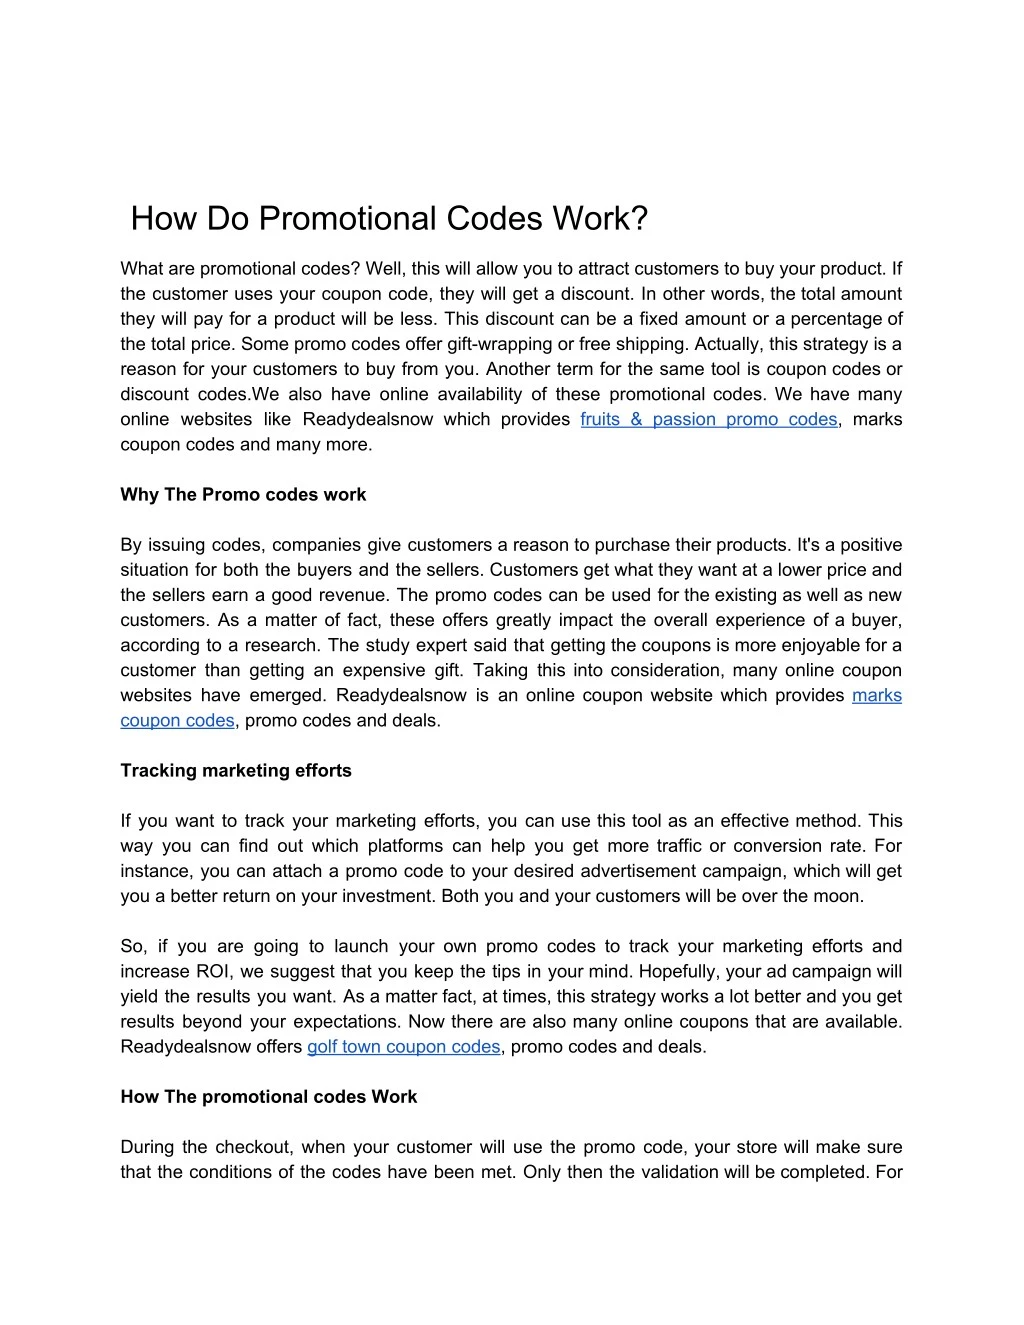 how do promotional codes work